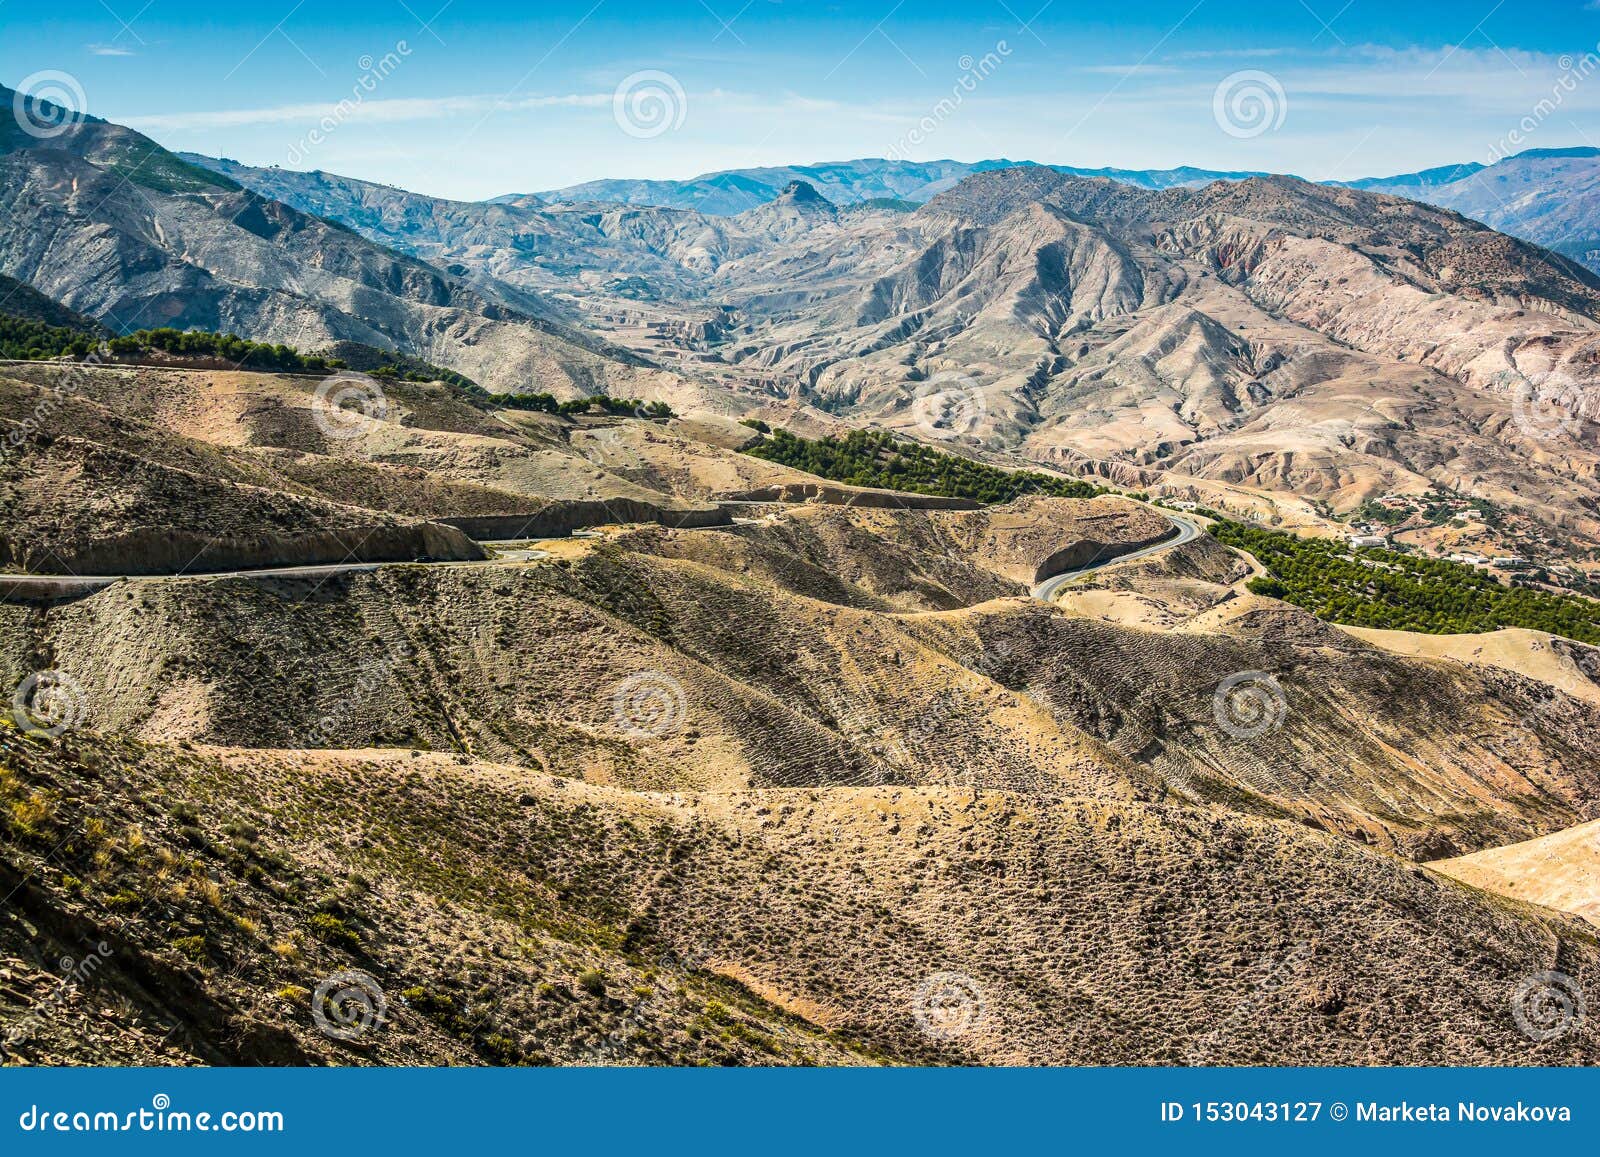 moroccan mountains between cities taza and al hoceima on north of morocco